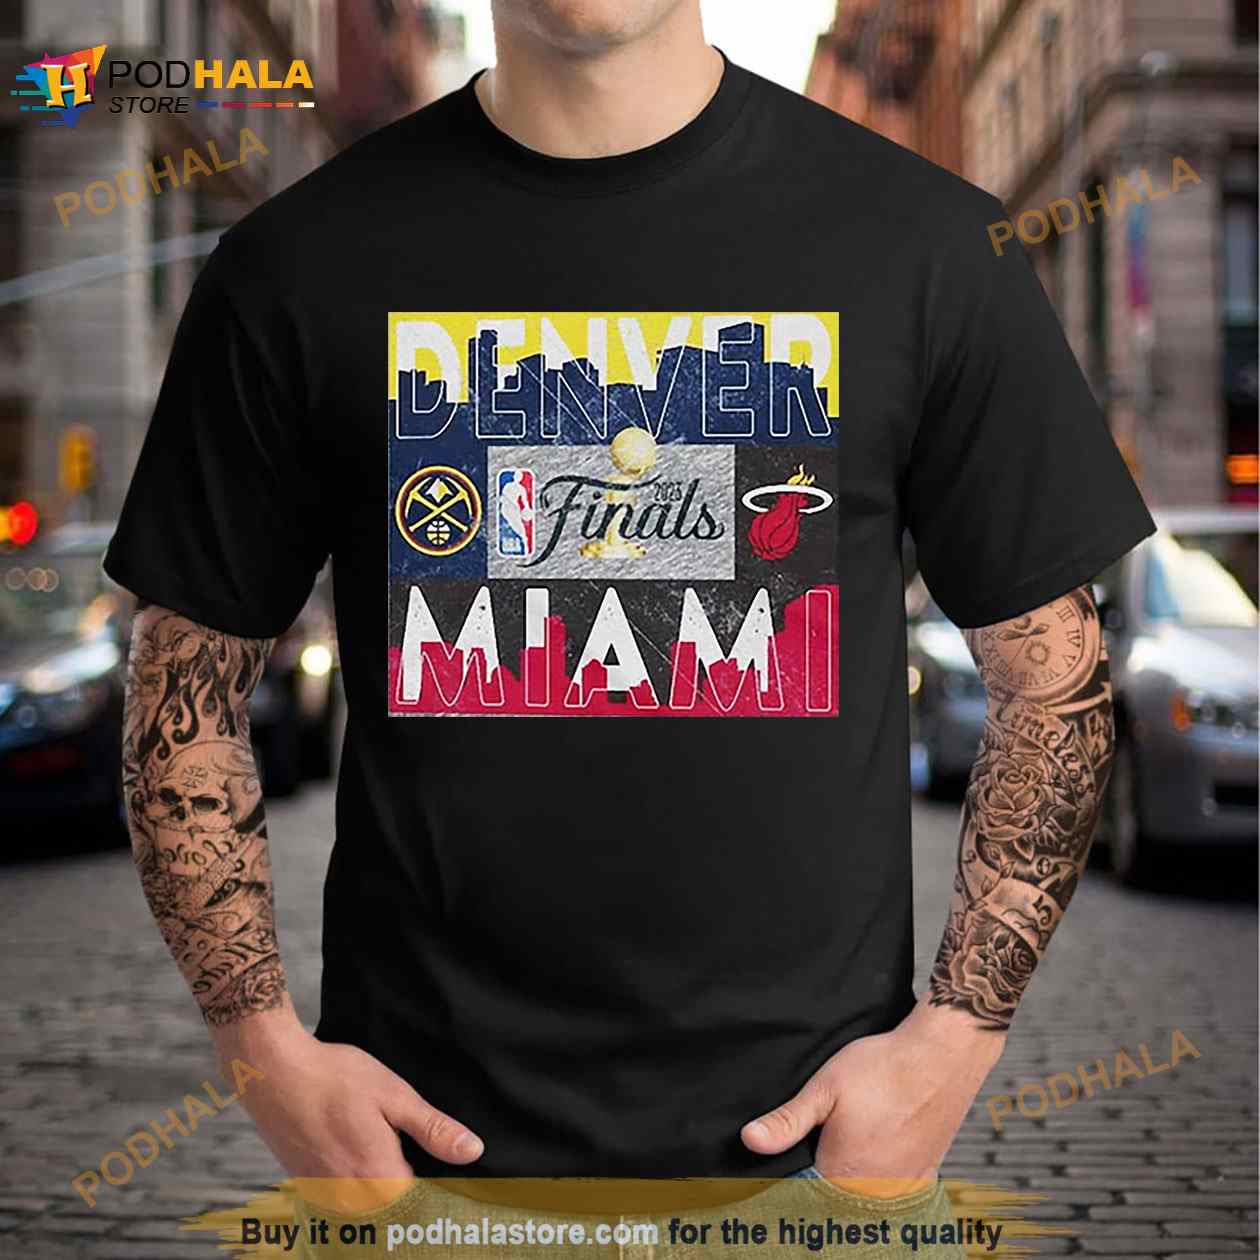 Best Miami Heat apparel to buy on Fanatics for the 2023 NBA Finals